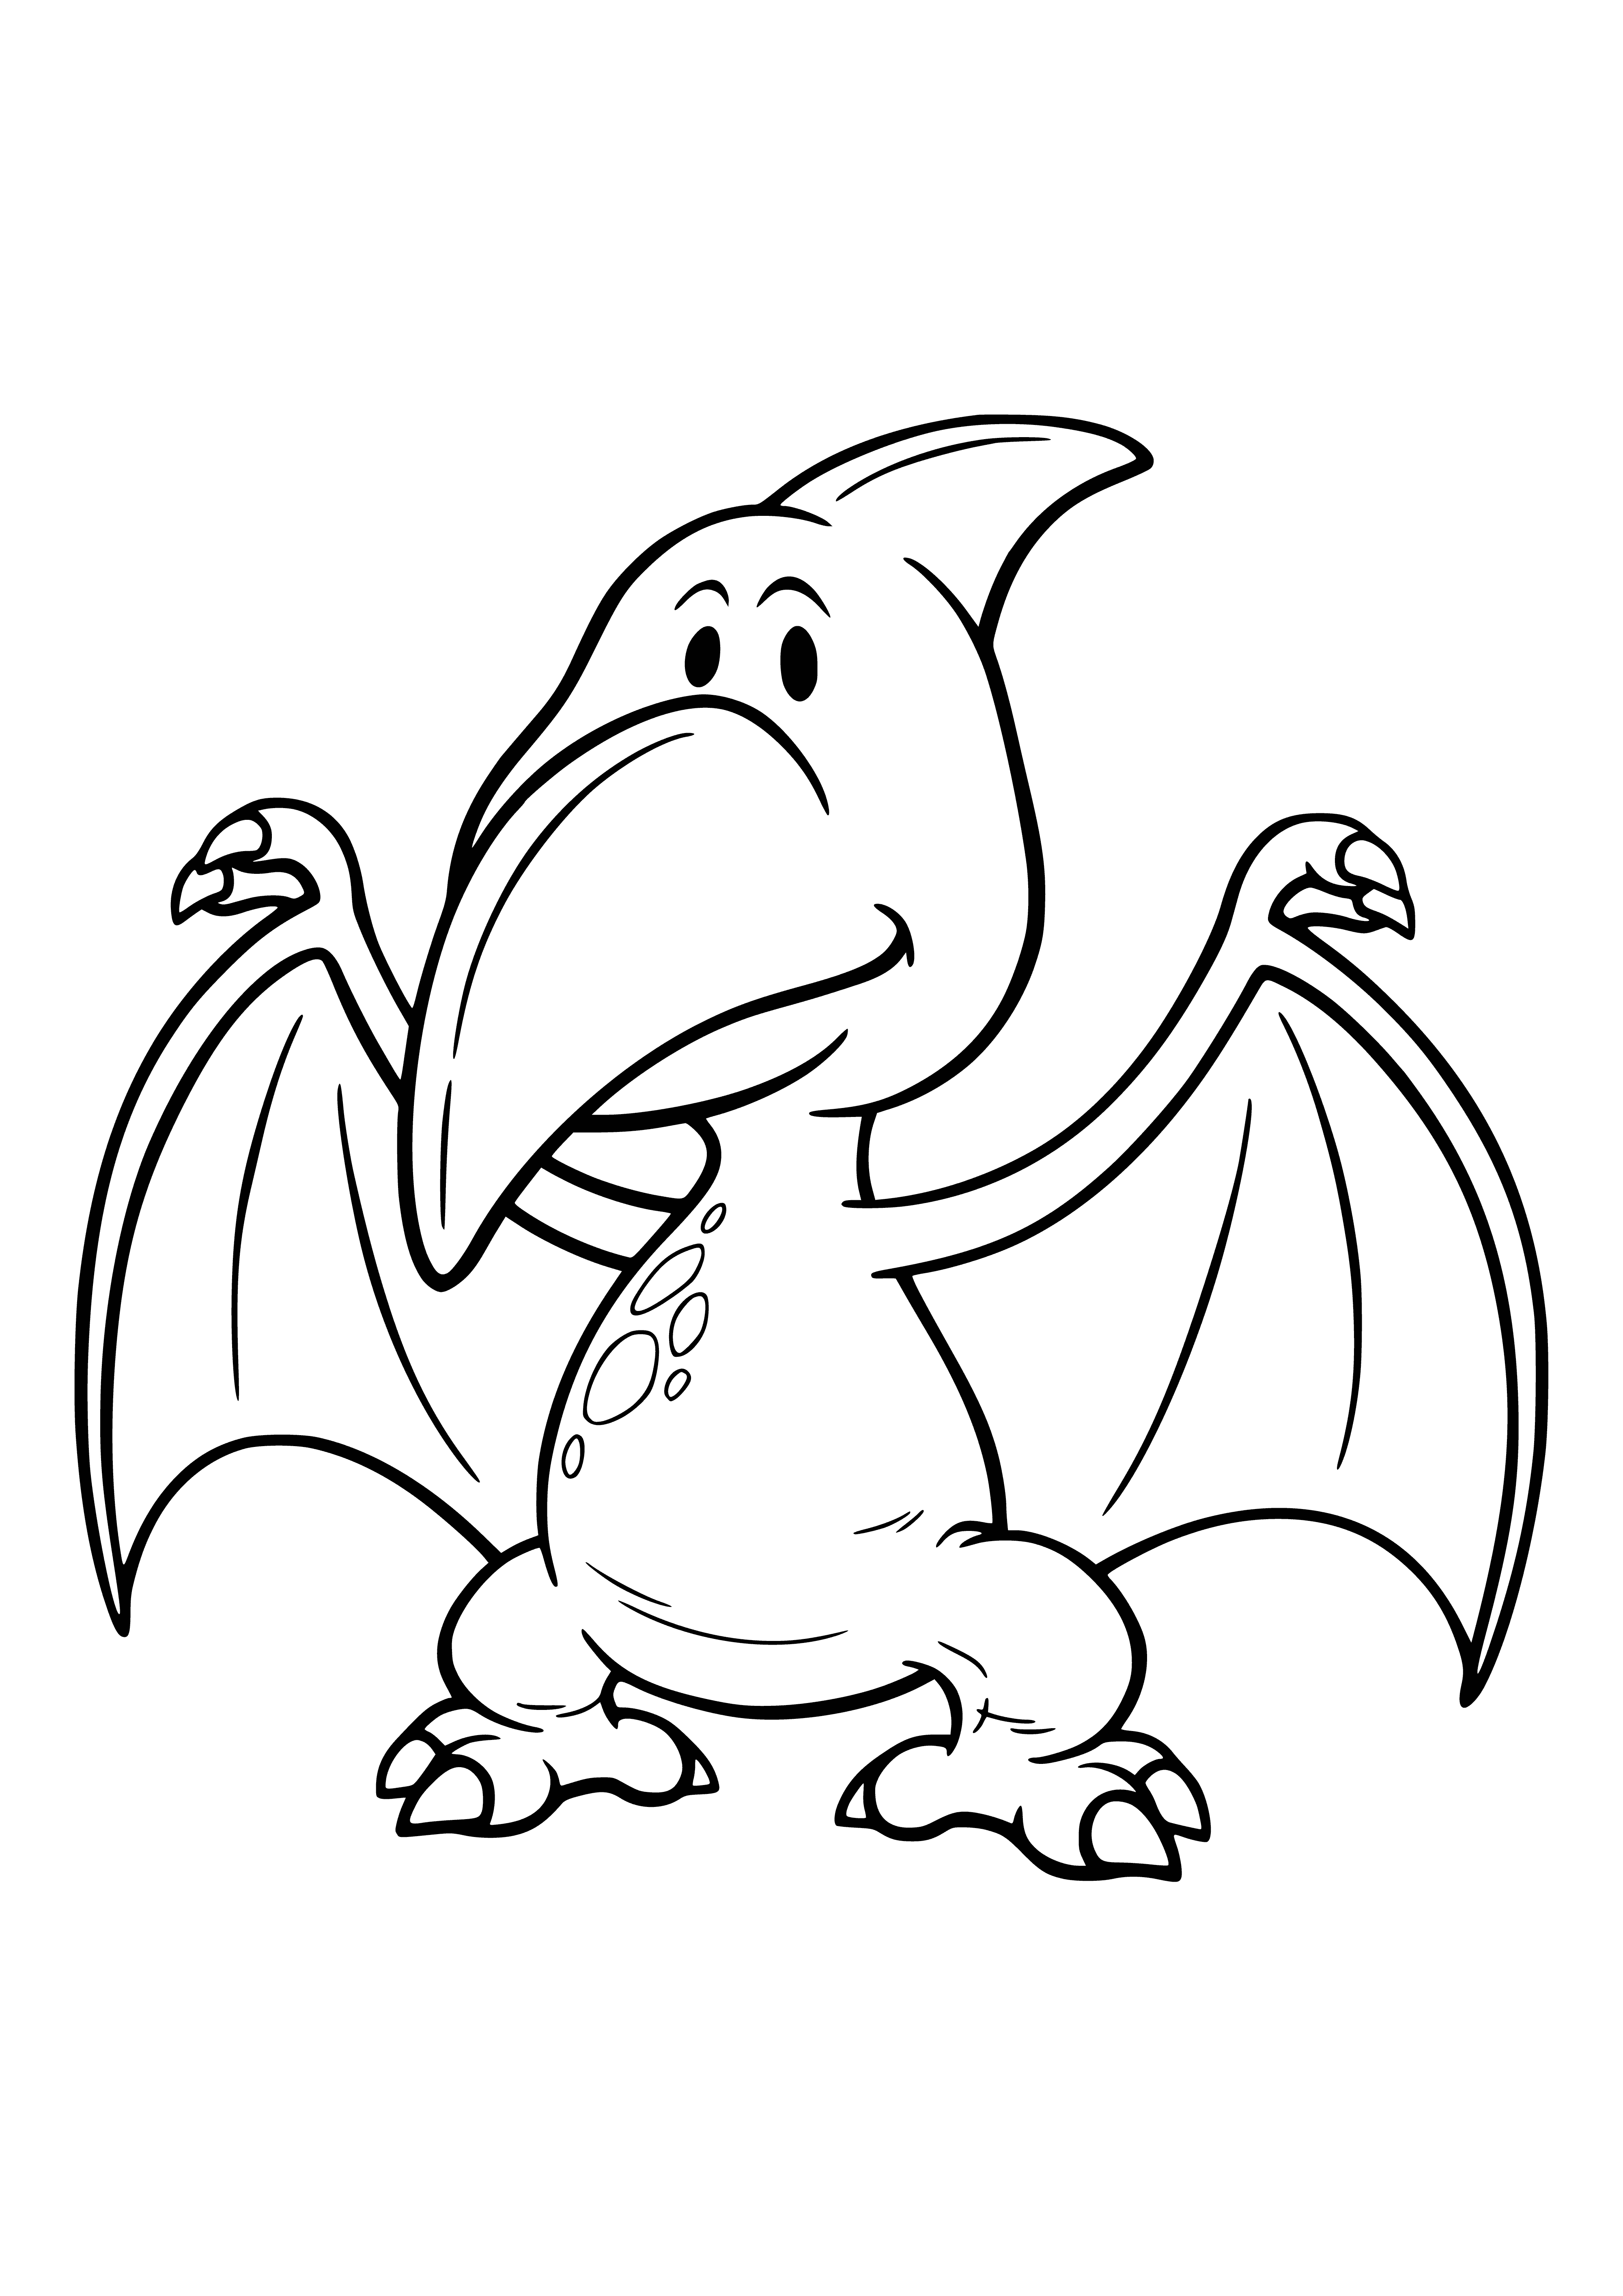 coloring page: Small, brown baby pterodactyl perched on rock: large, webbed wings, long tail, thin beak, small eyes.